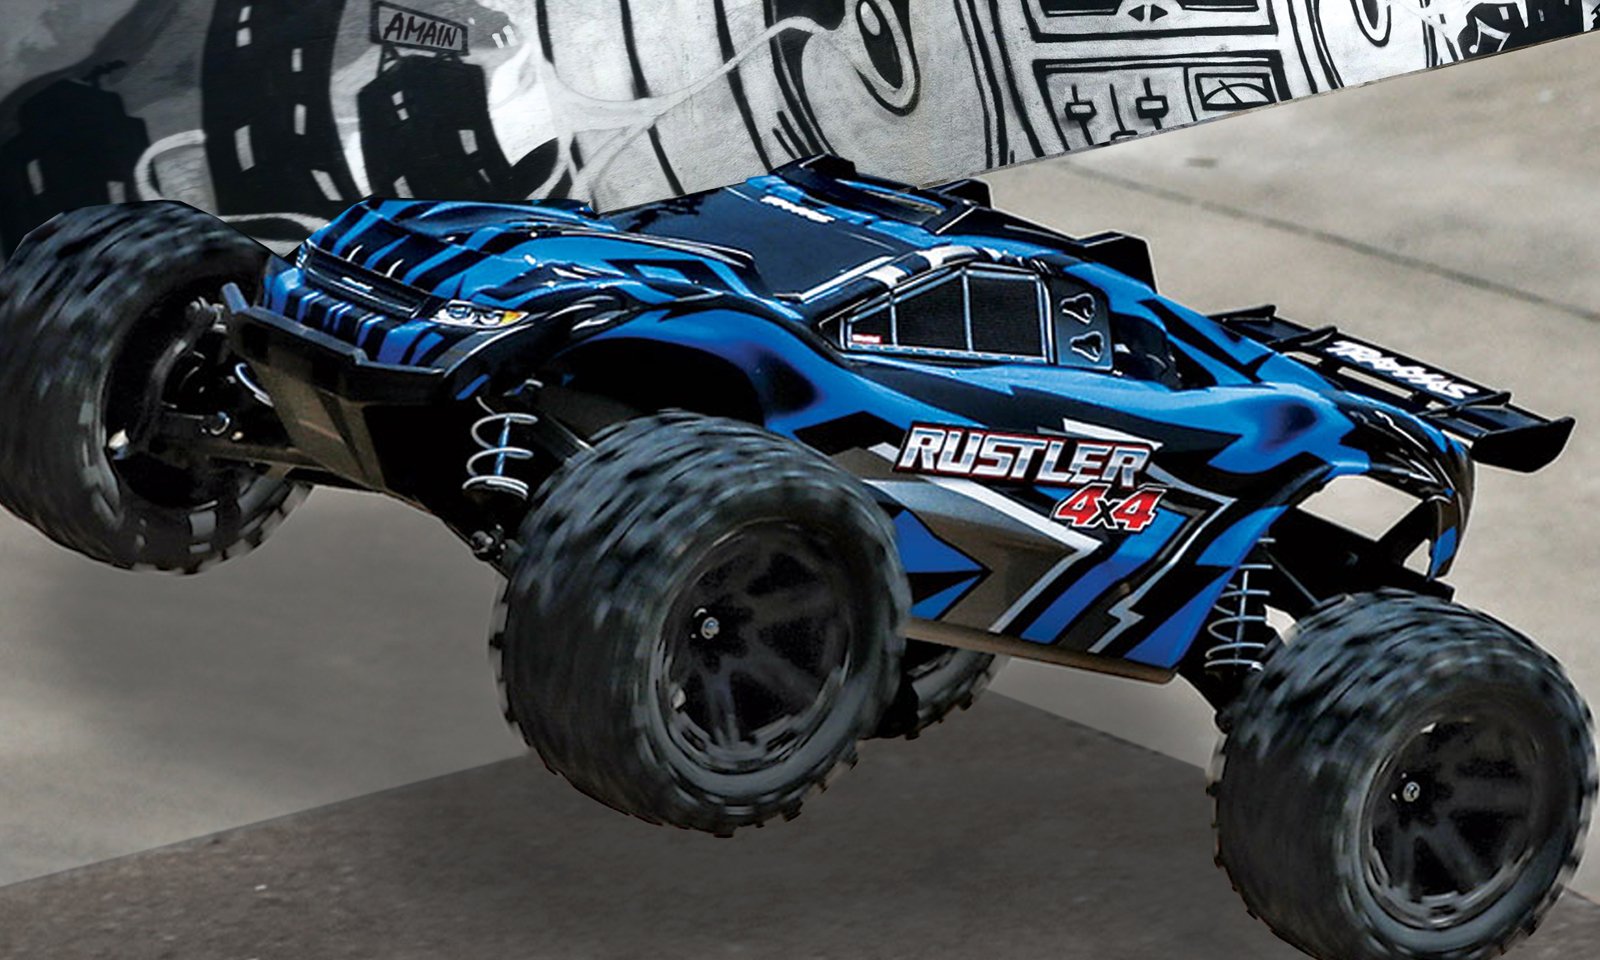 Top 10 In Stock Traxxas Vehicles - Best RC Availability